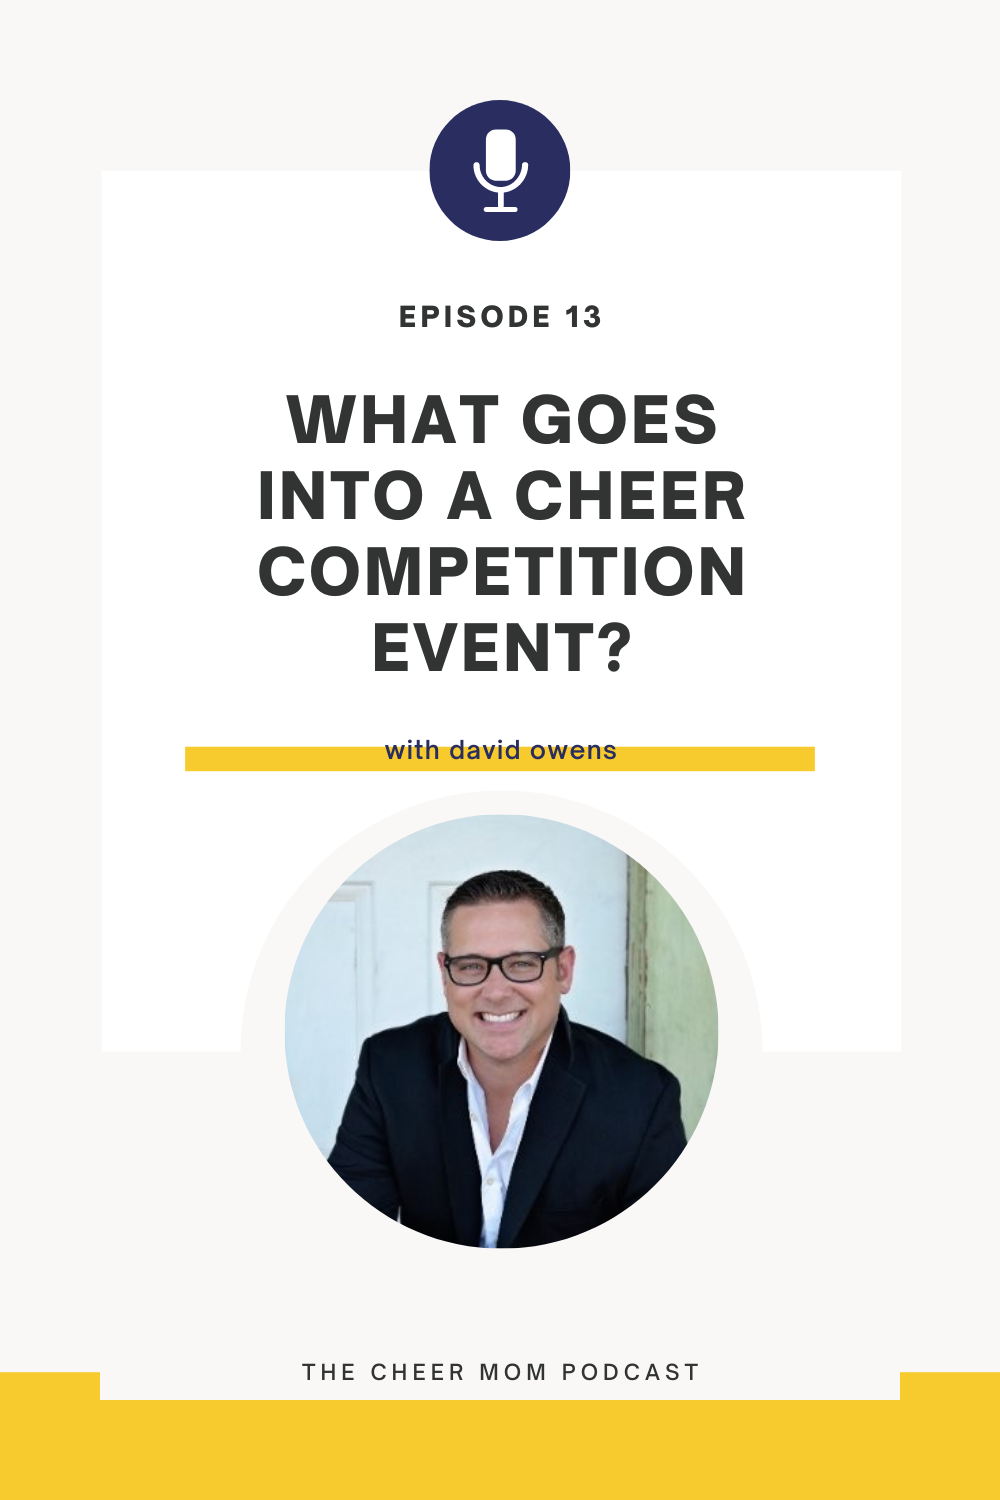 WHAT GOES INTO A CHEER COMPETITION EVENT? The Cheer Mom Blog